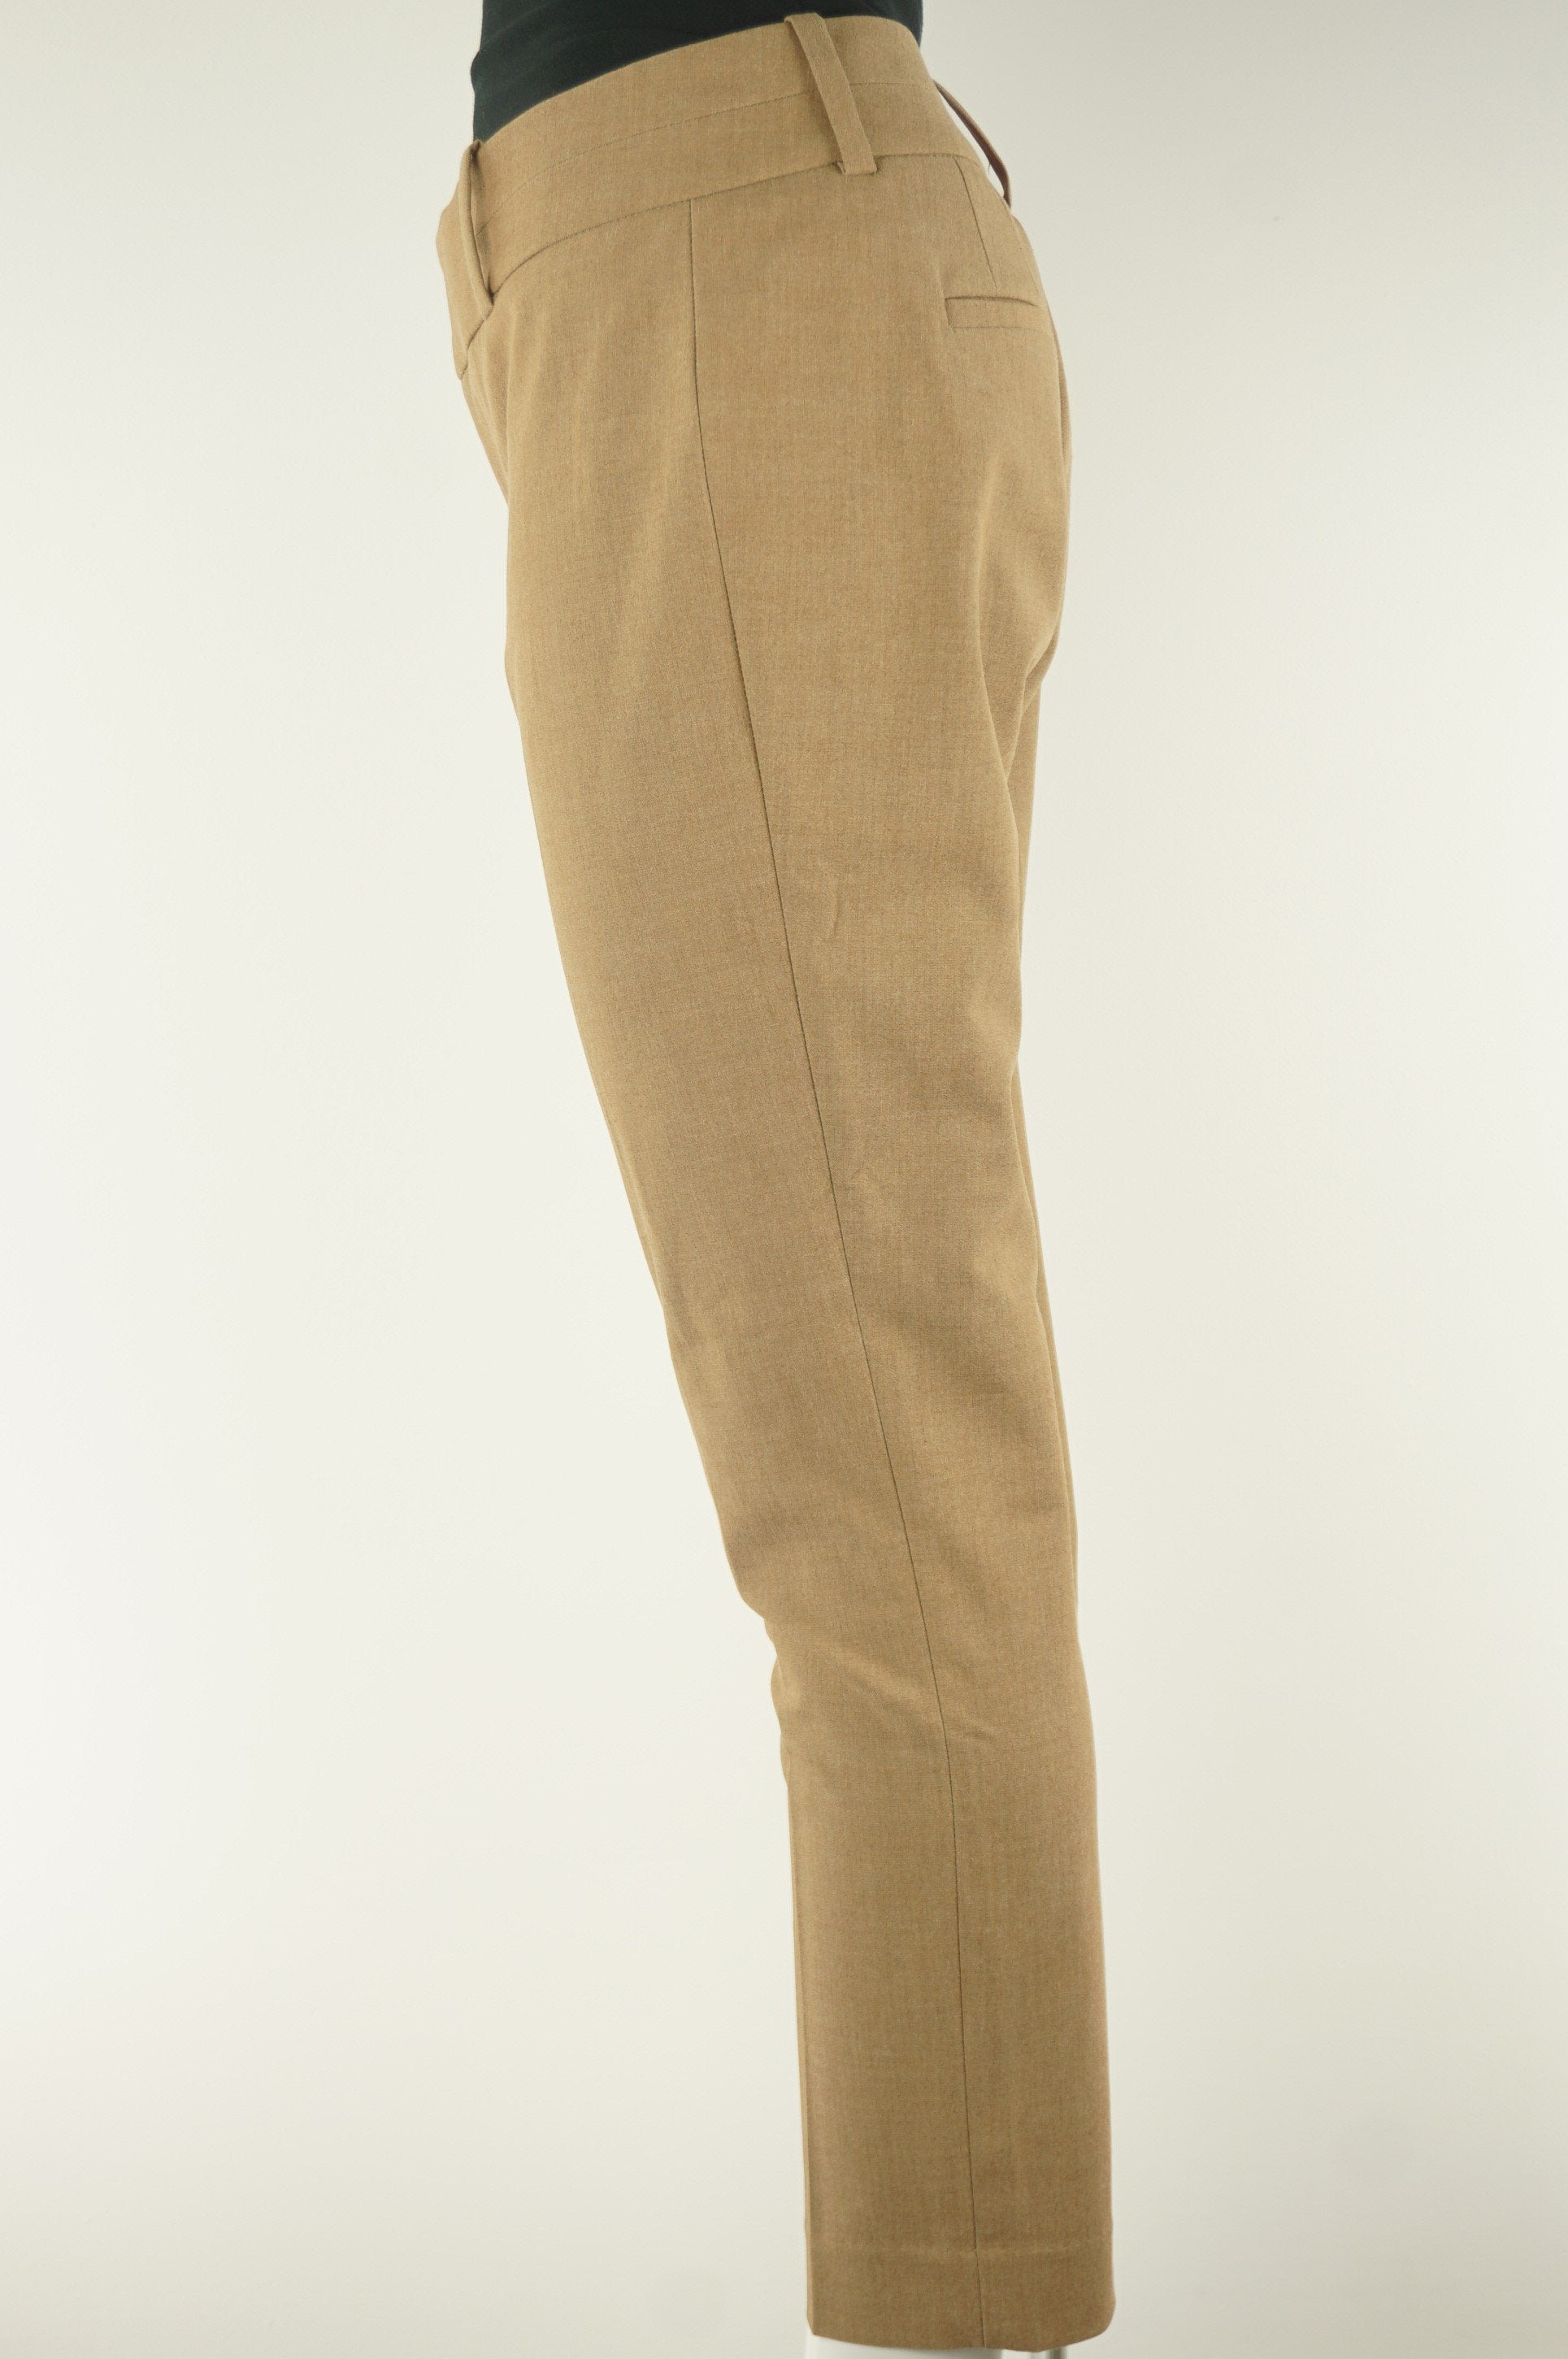 Calvin Klein Stretchy Dress Pants, A clean and professional pair of pants for the best boardroom impresseion (not that you need it, cuz you are killing it already). Not to mention the comfortableness provided by the stretchy fabric. , Brown, 67% Polyester, 29% Rayon, 4% Elastane, women's Pants & Shorts, women's Brown Pants & Shorts, Calvin Klein women's Pants & Shorts, comfortable women's dress pants, women's professional pants